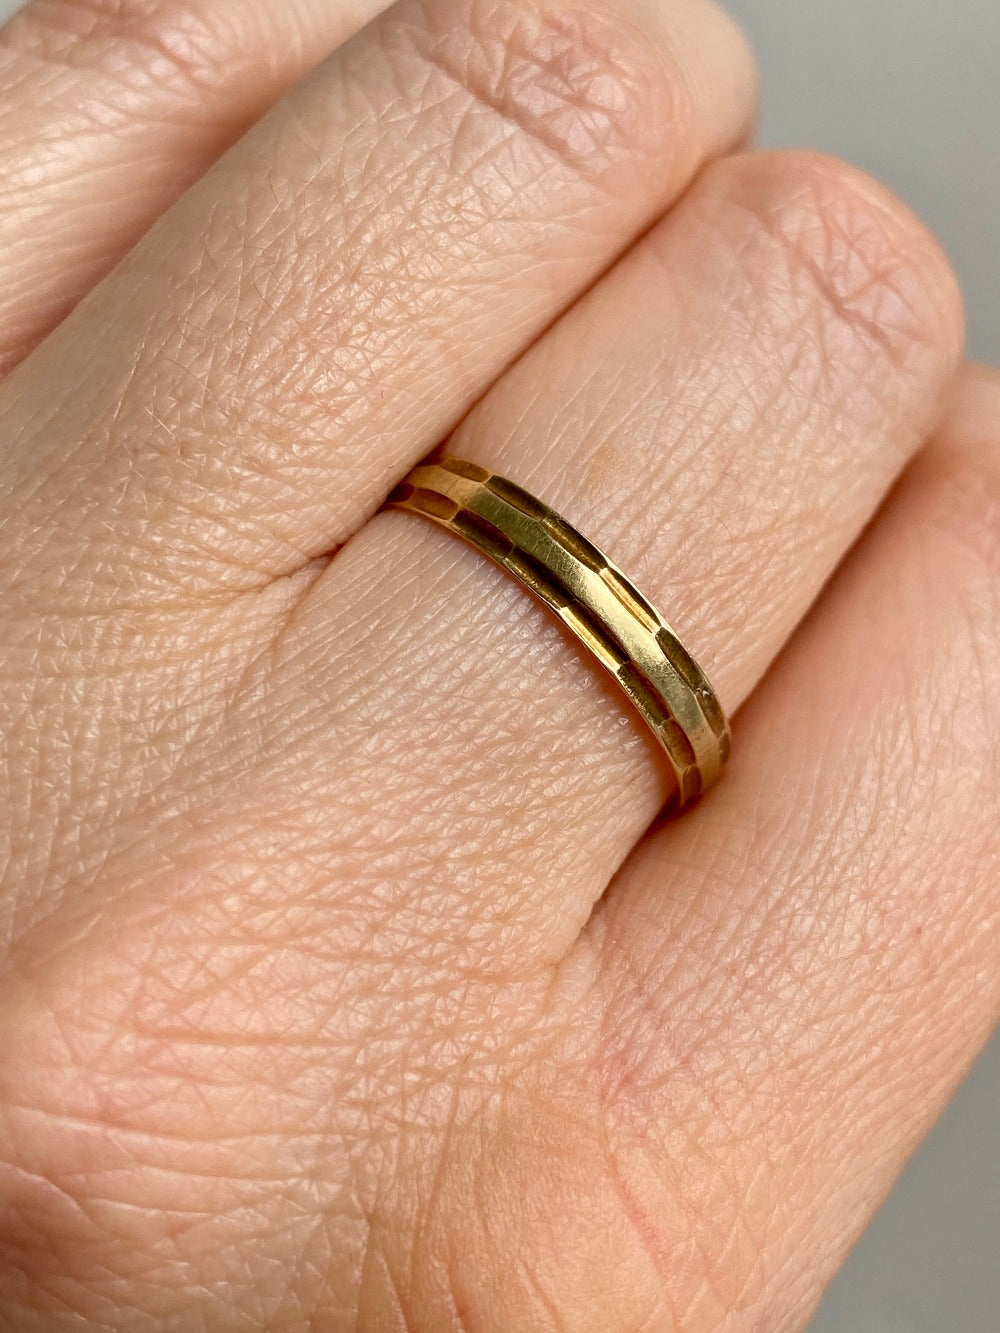 Scandinavian 18k gold ring with surface patterning- size 9